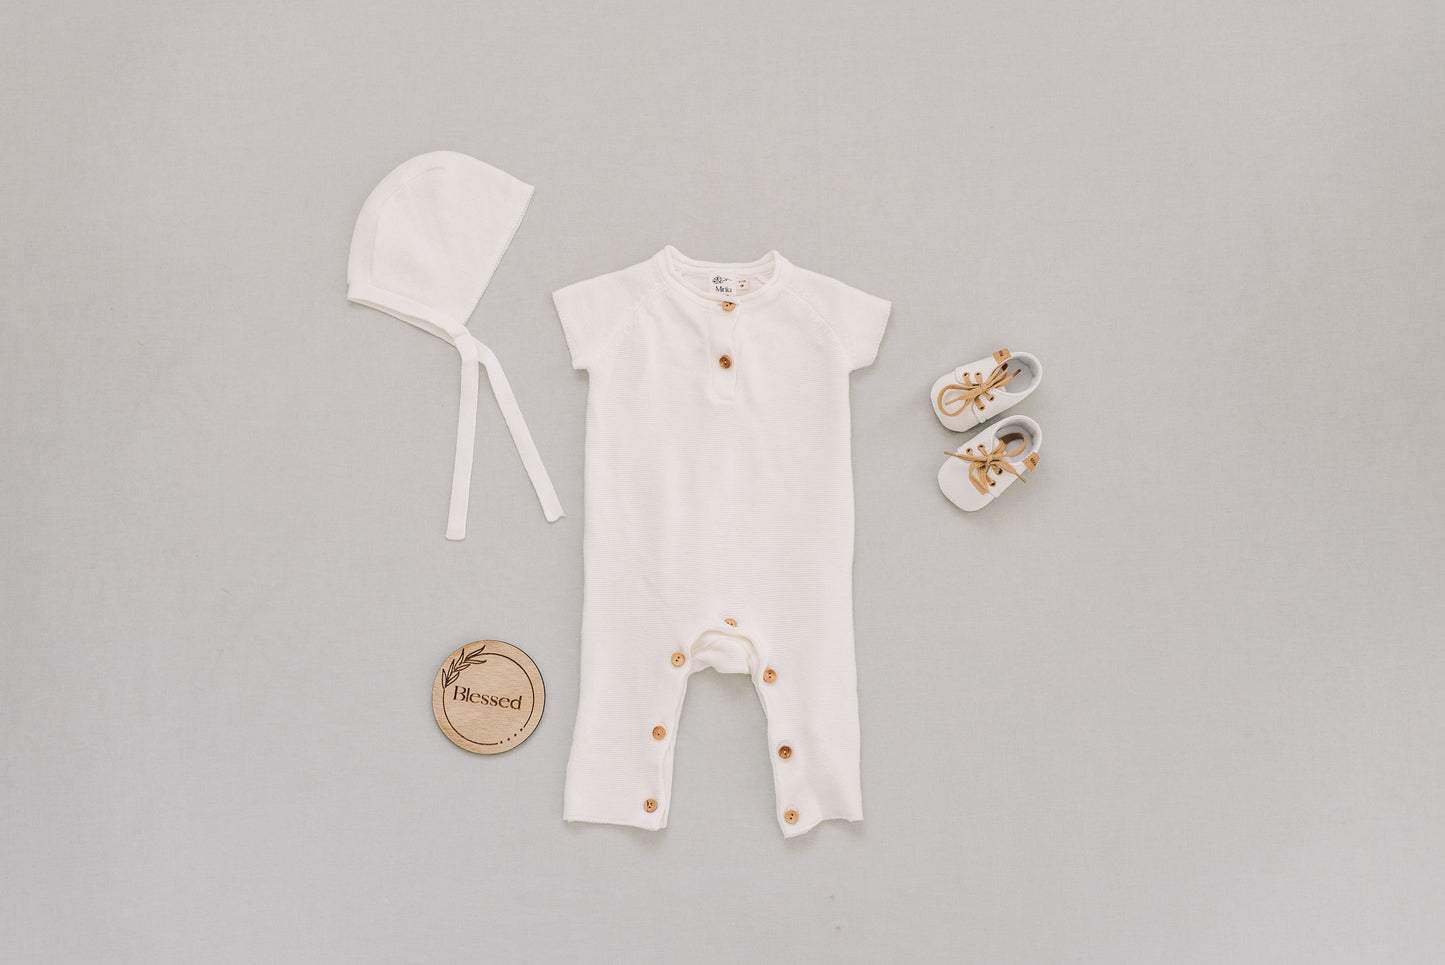 Flat lat with white bonnet, while onesie, white shoes with brown laces and a wooden blessed sign.